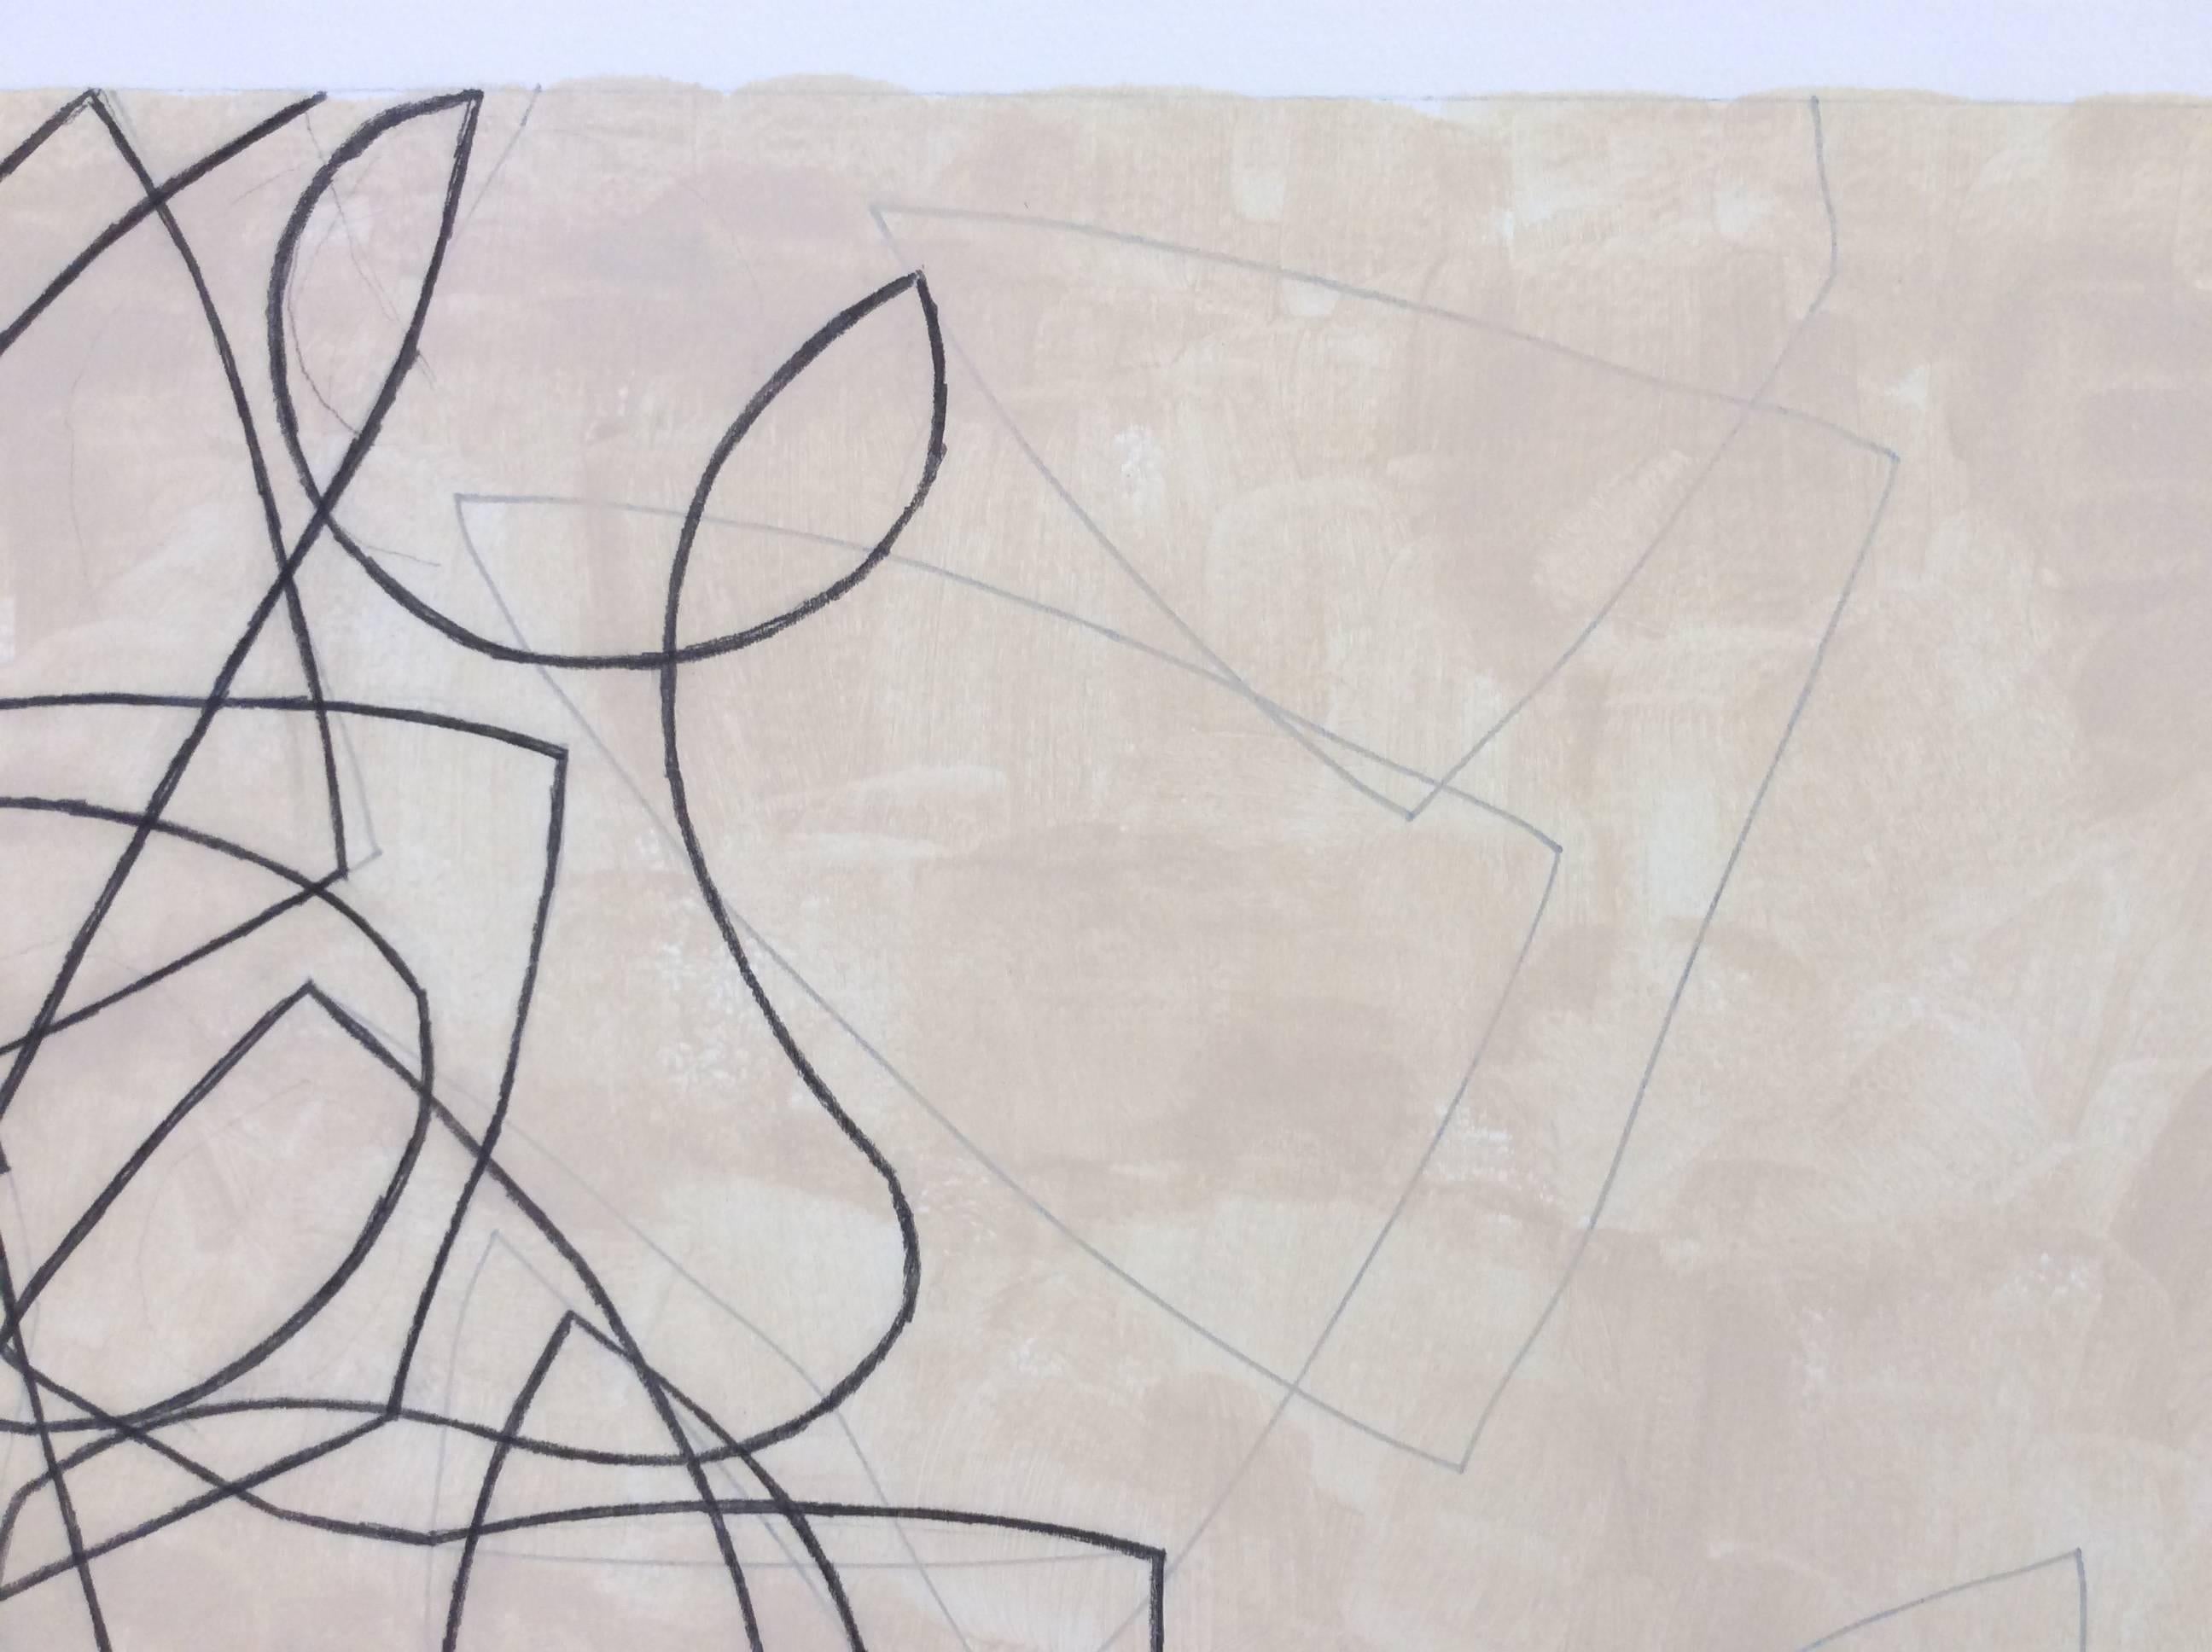 graphite & acrylic on Arches paper
18 x 24 inch image on 23 x 30 inch paper, unframed

abstract line drawing, abstract drawing, line drawing, abstract lines, curvy lines, curvy line drawing, organic shapes, black and white drawing, neutral